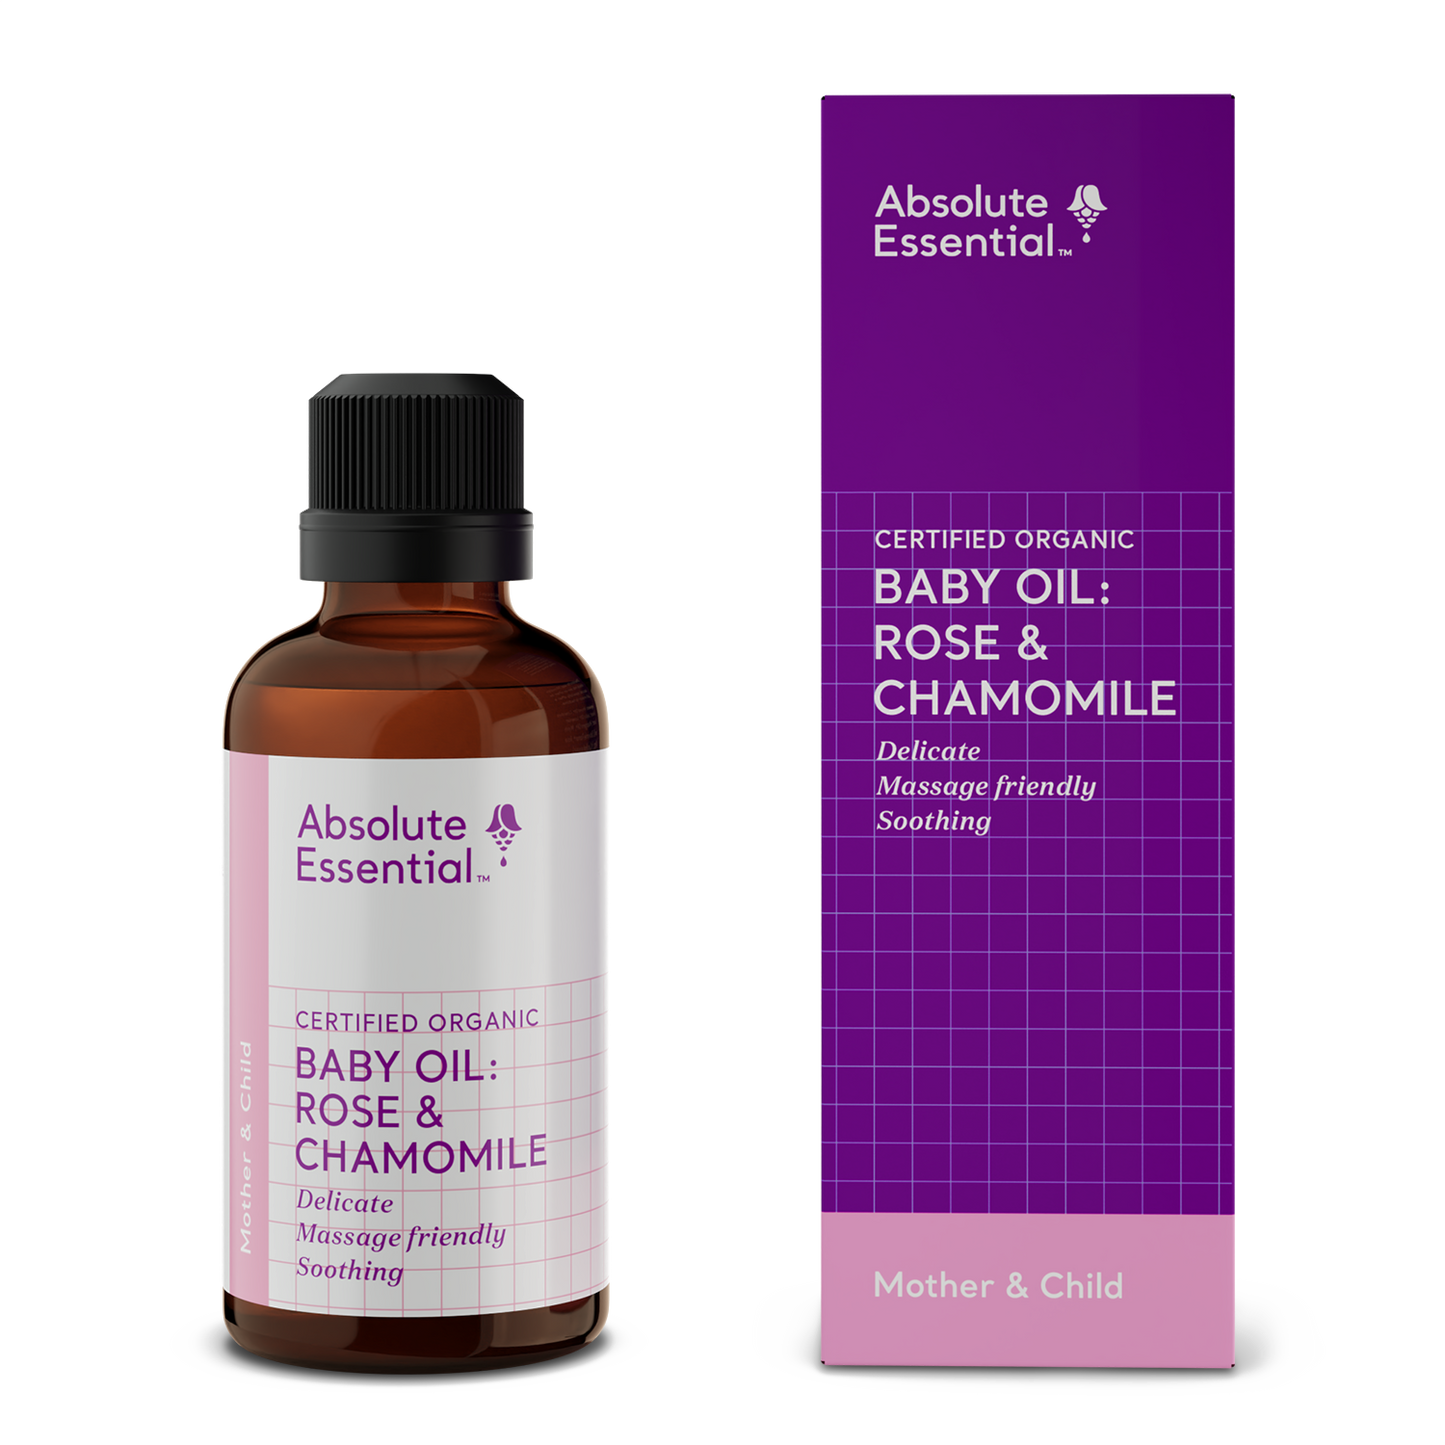 Baby Oil: Rose & Chamomile Essential Oil Blend